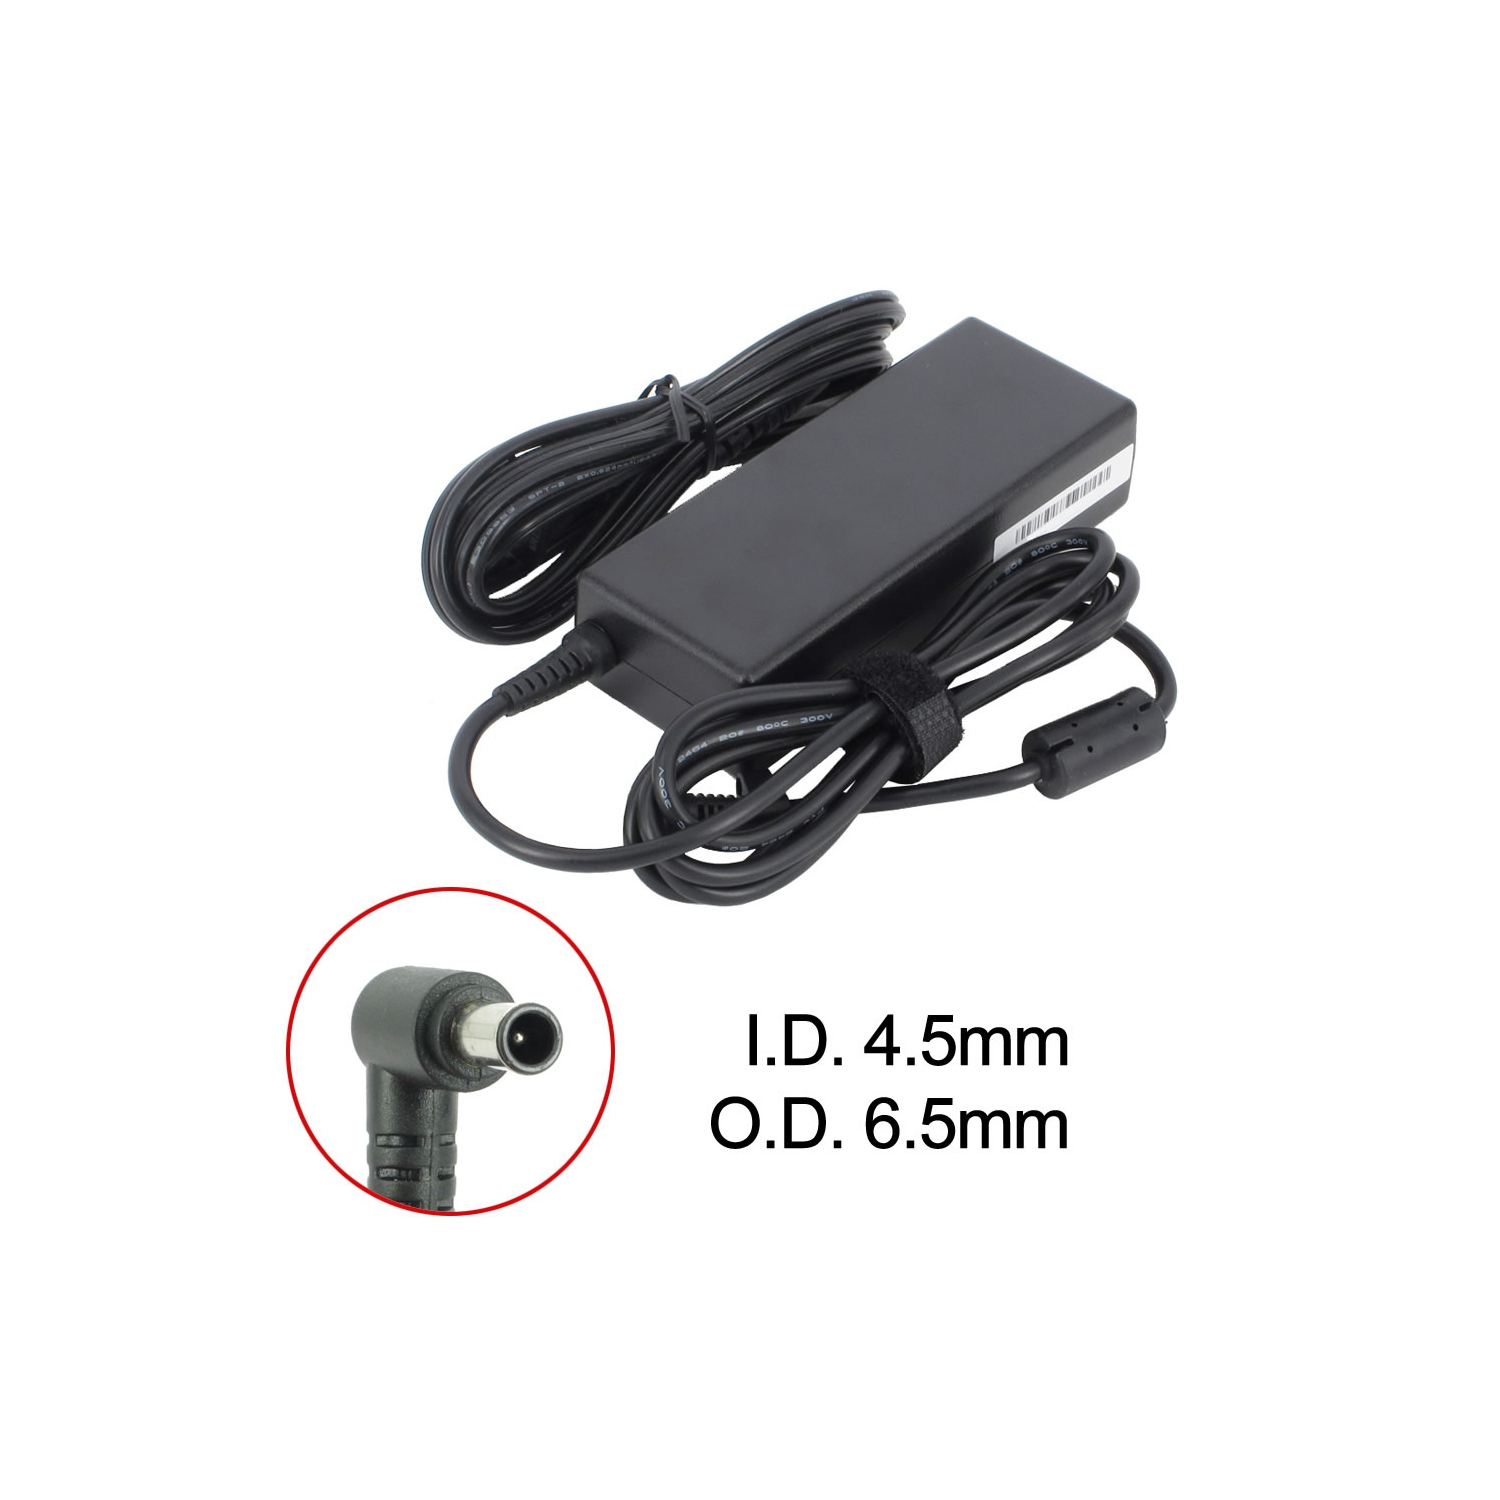 Brand New Laptop AC Adapter for Sony VAIO VPC-EB1Z1E, PCGA-AC19V13, VGP-AC19V12, VGP-AC19V23, VGP-AC19V37, VGP-AC19V76